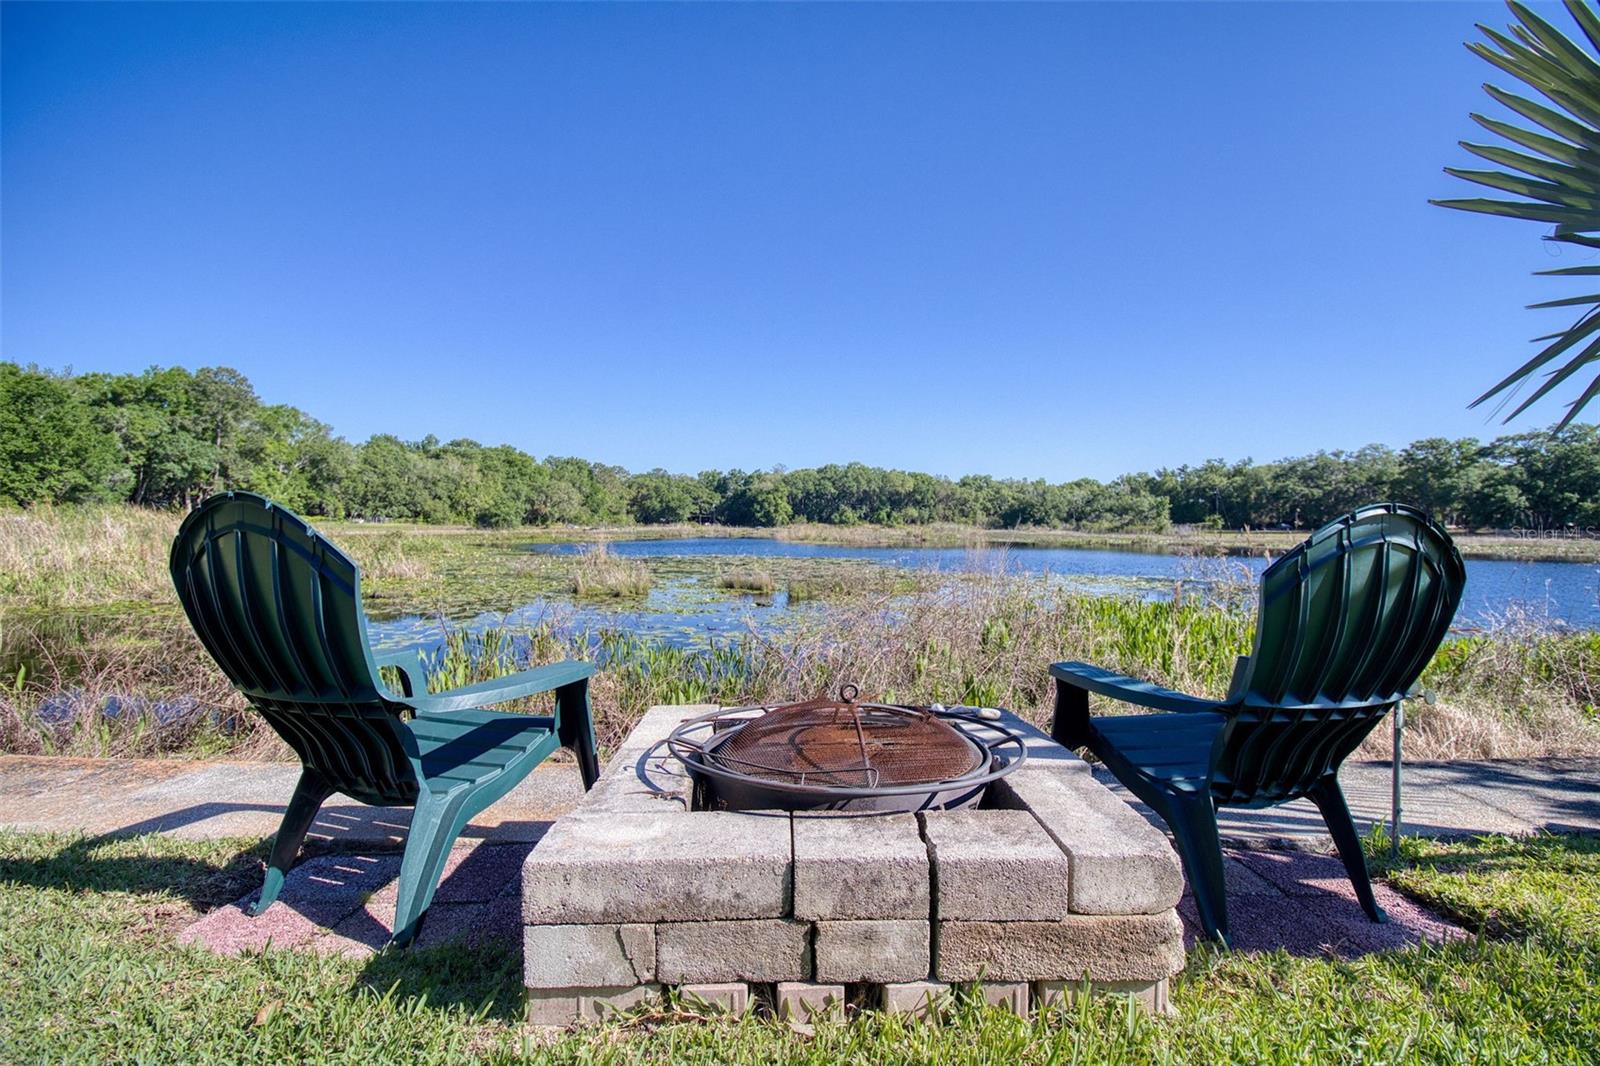 Fire pit on the lake